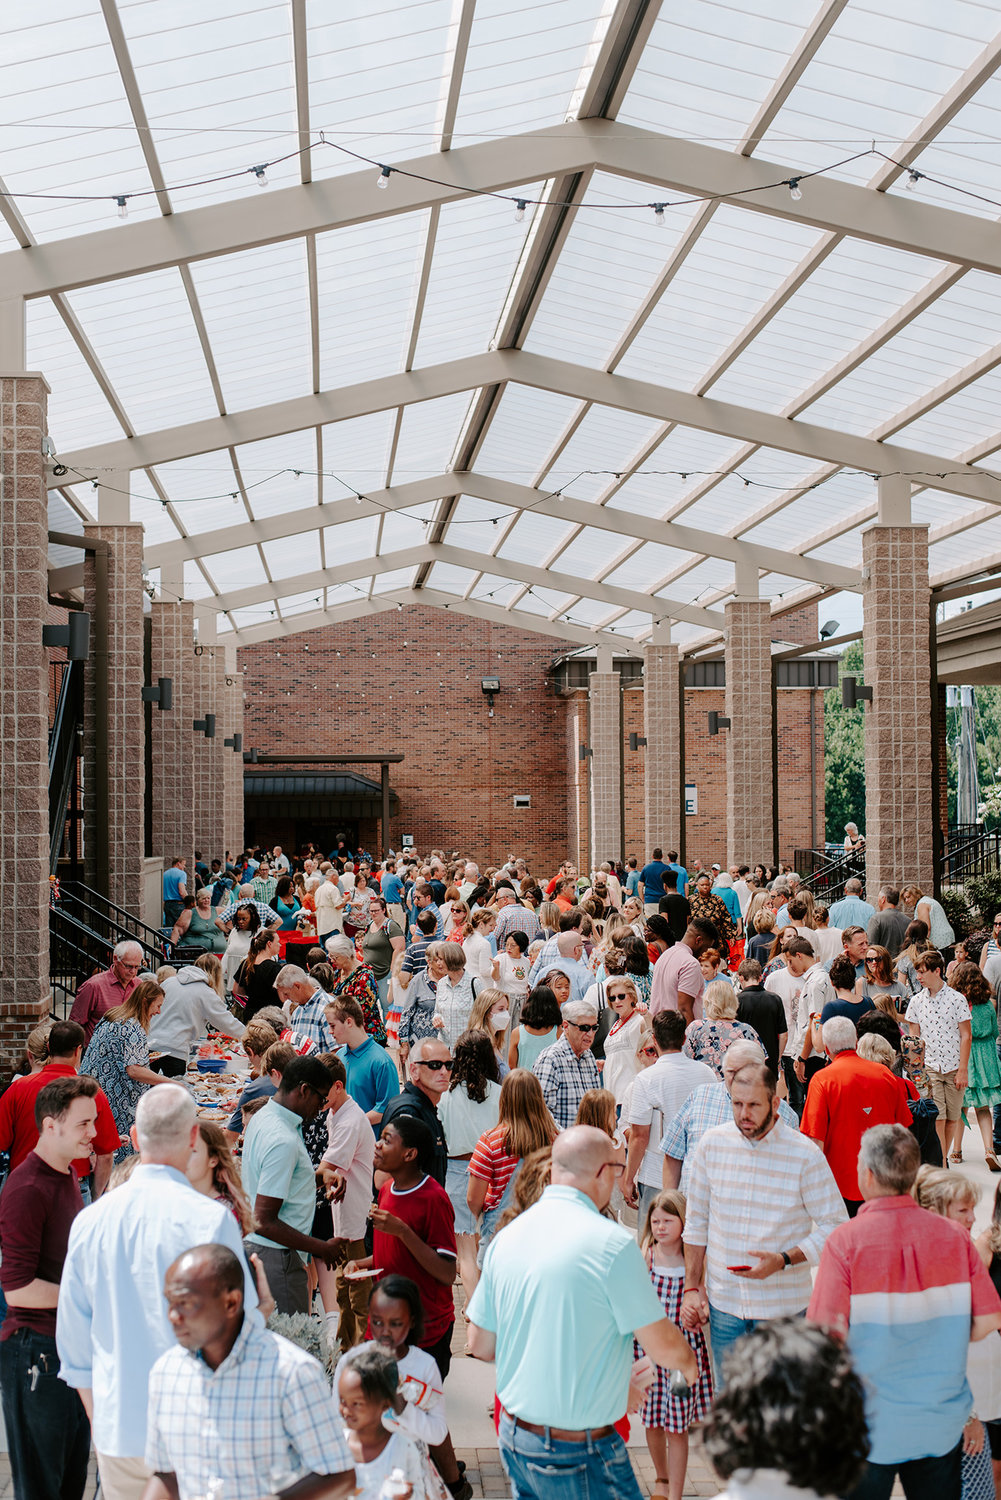 Attendees enjoy a meal during a celebration of Hebron Baptist Church's 180th anniversary Sunday, July 3, 2022, in Dacula, Ga. (Photo/Hebron Baptist Church)